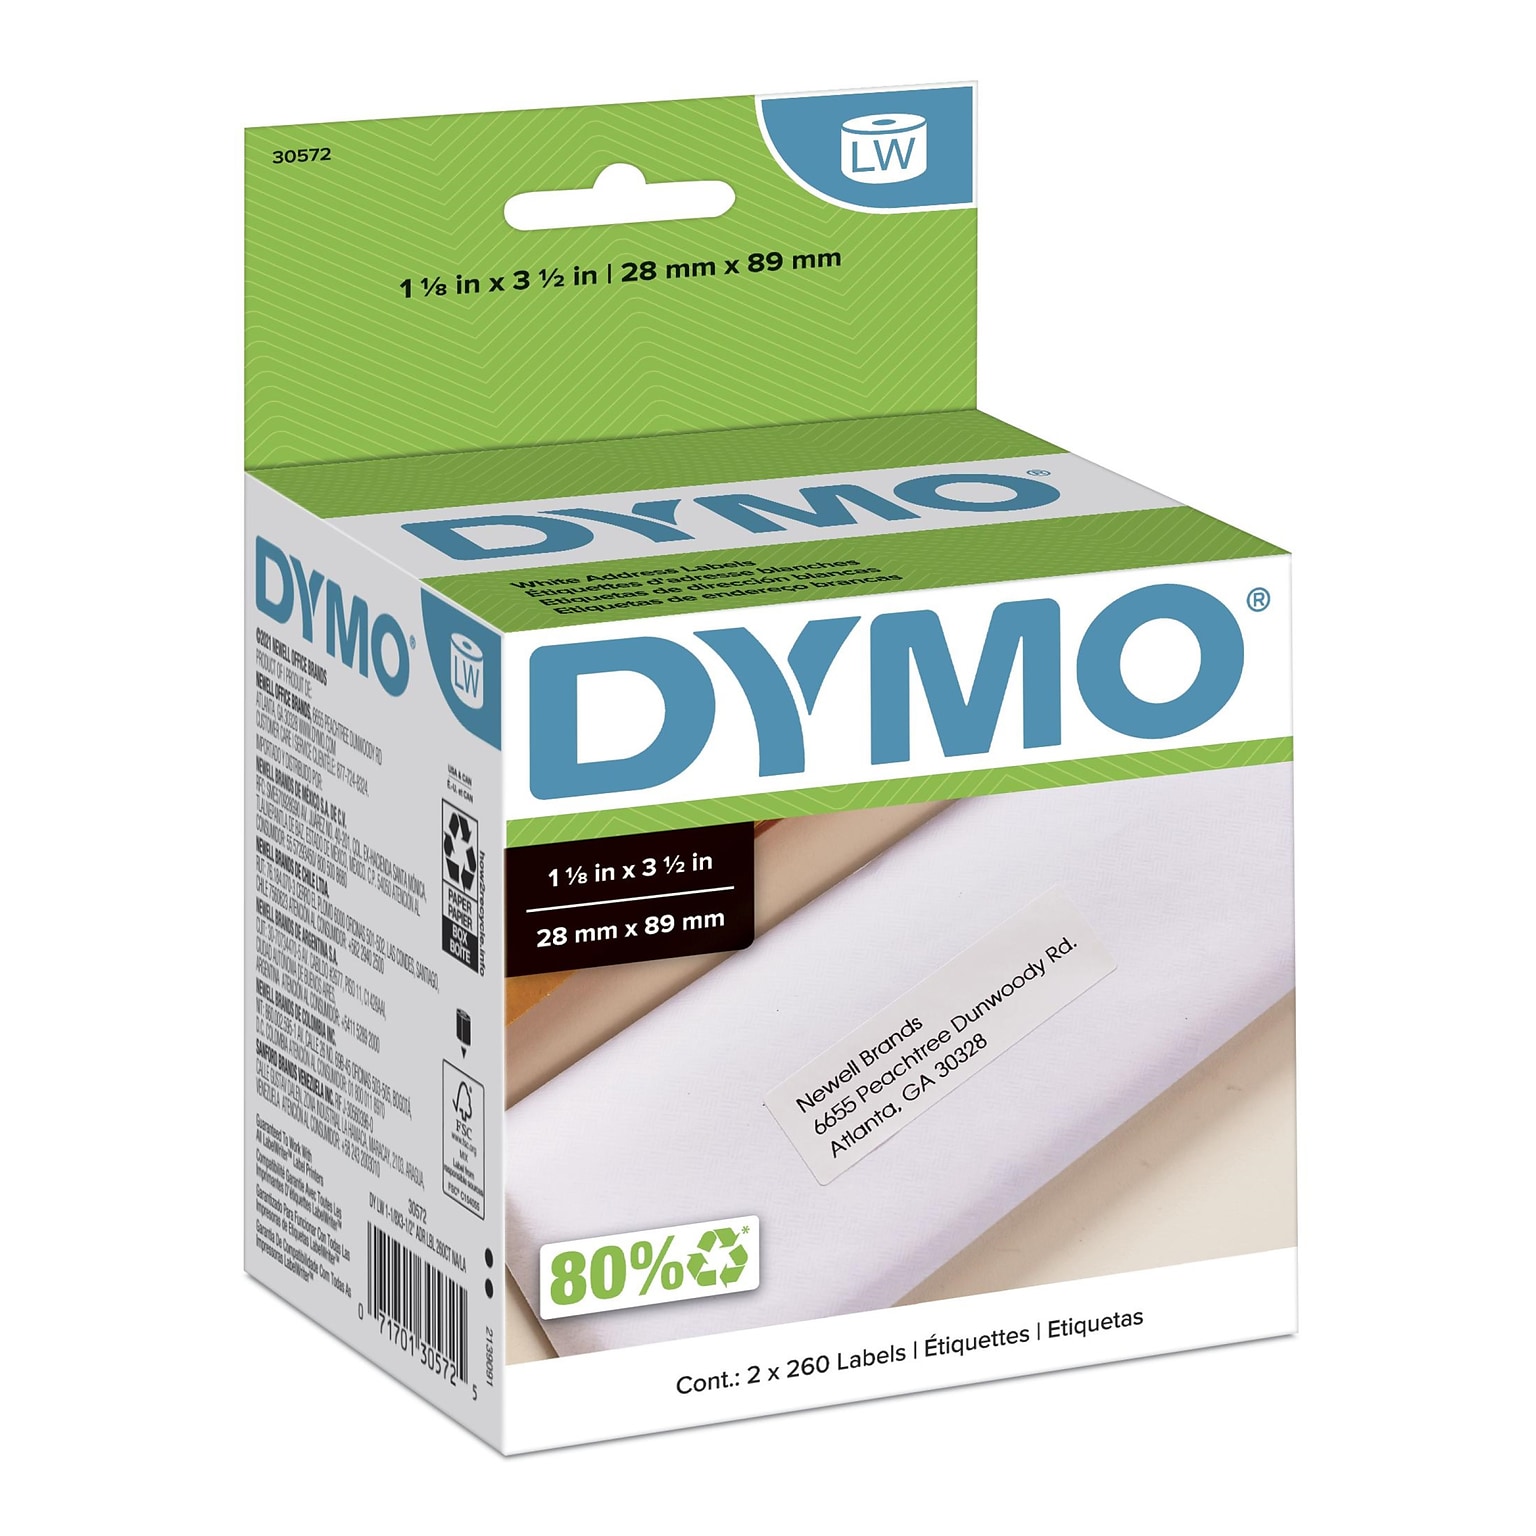 DYMO LabelWriter 30572 Mailing Address Labels, 3-1/2 x 1-1/8, Black on White, 260 Labels/Roll, 2 Rolls/Each (30572)